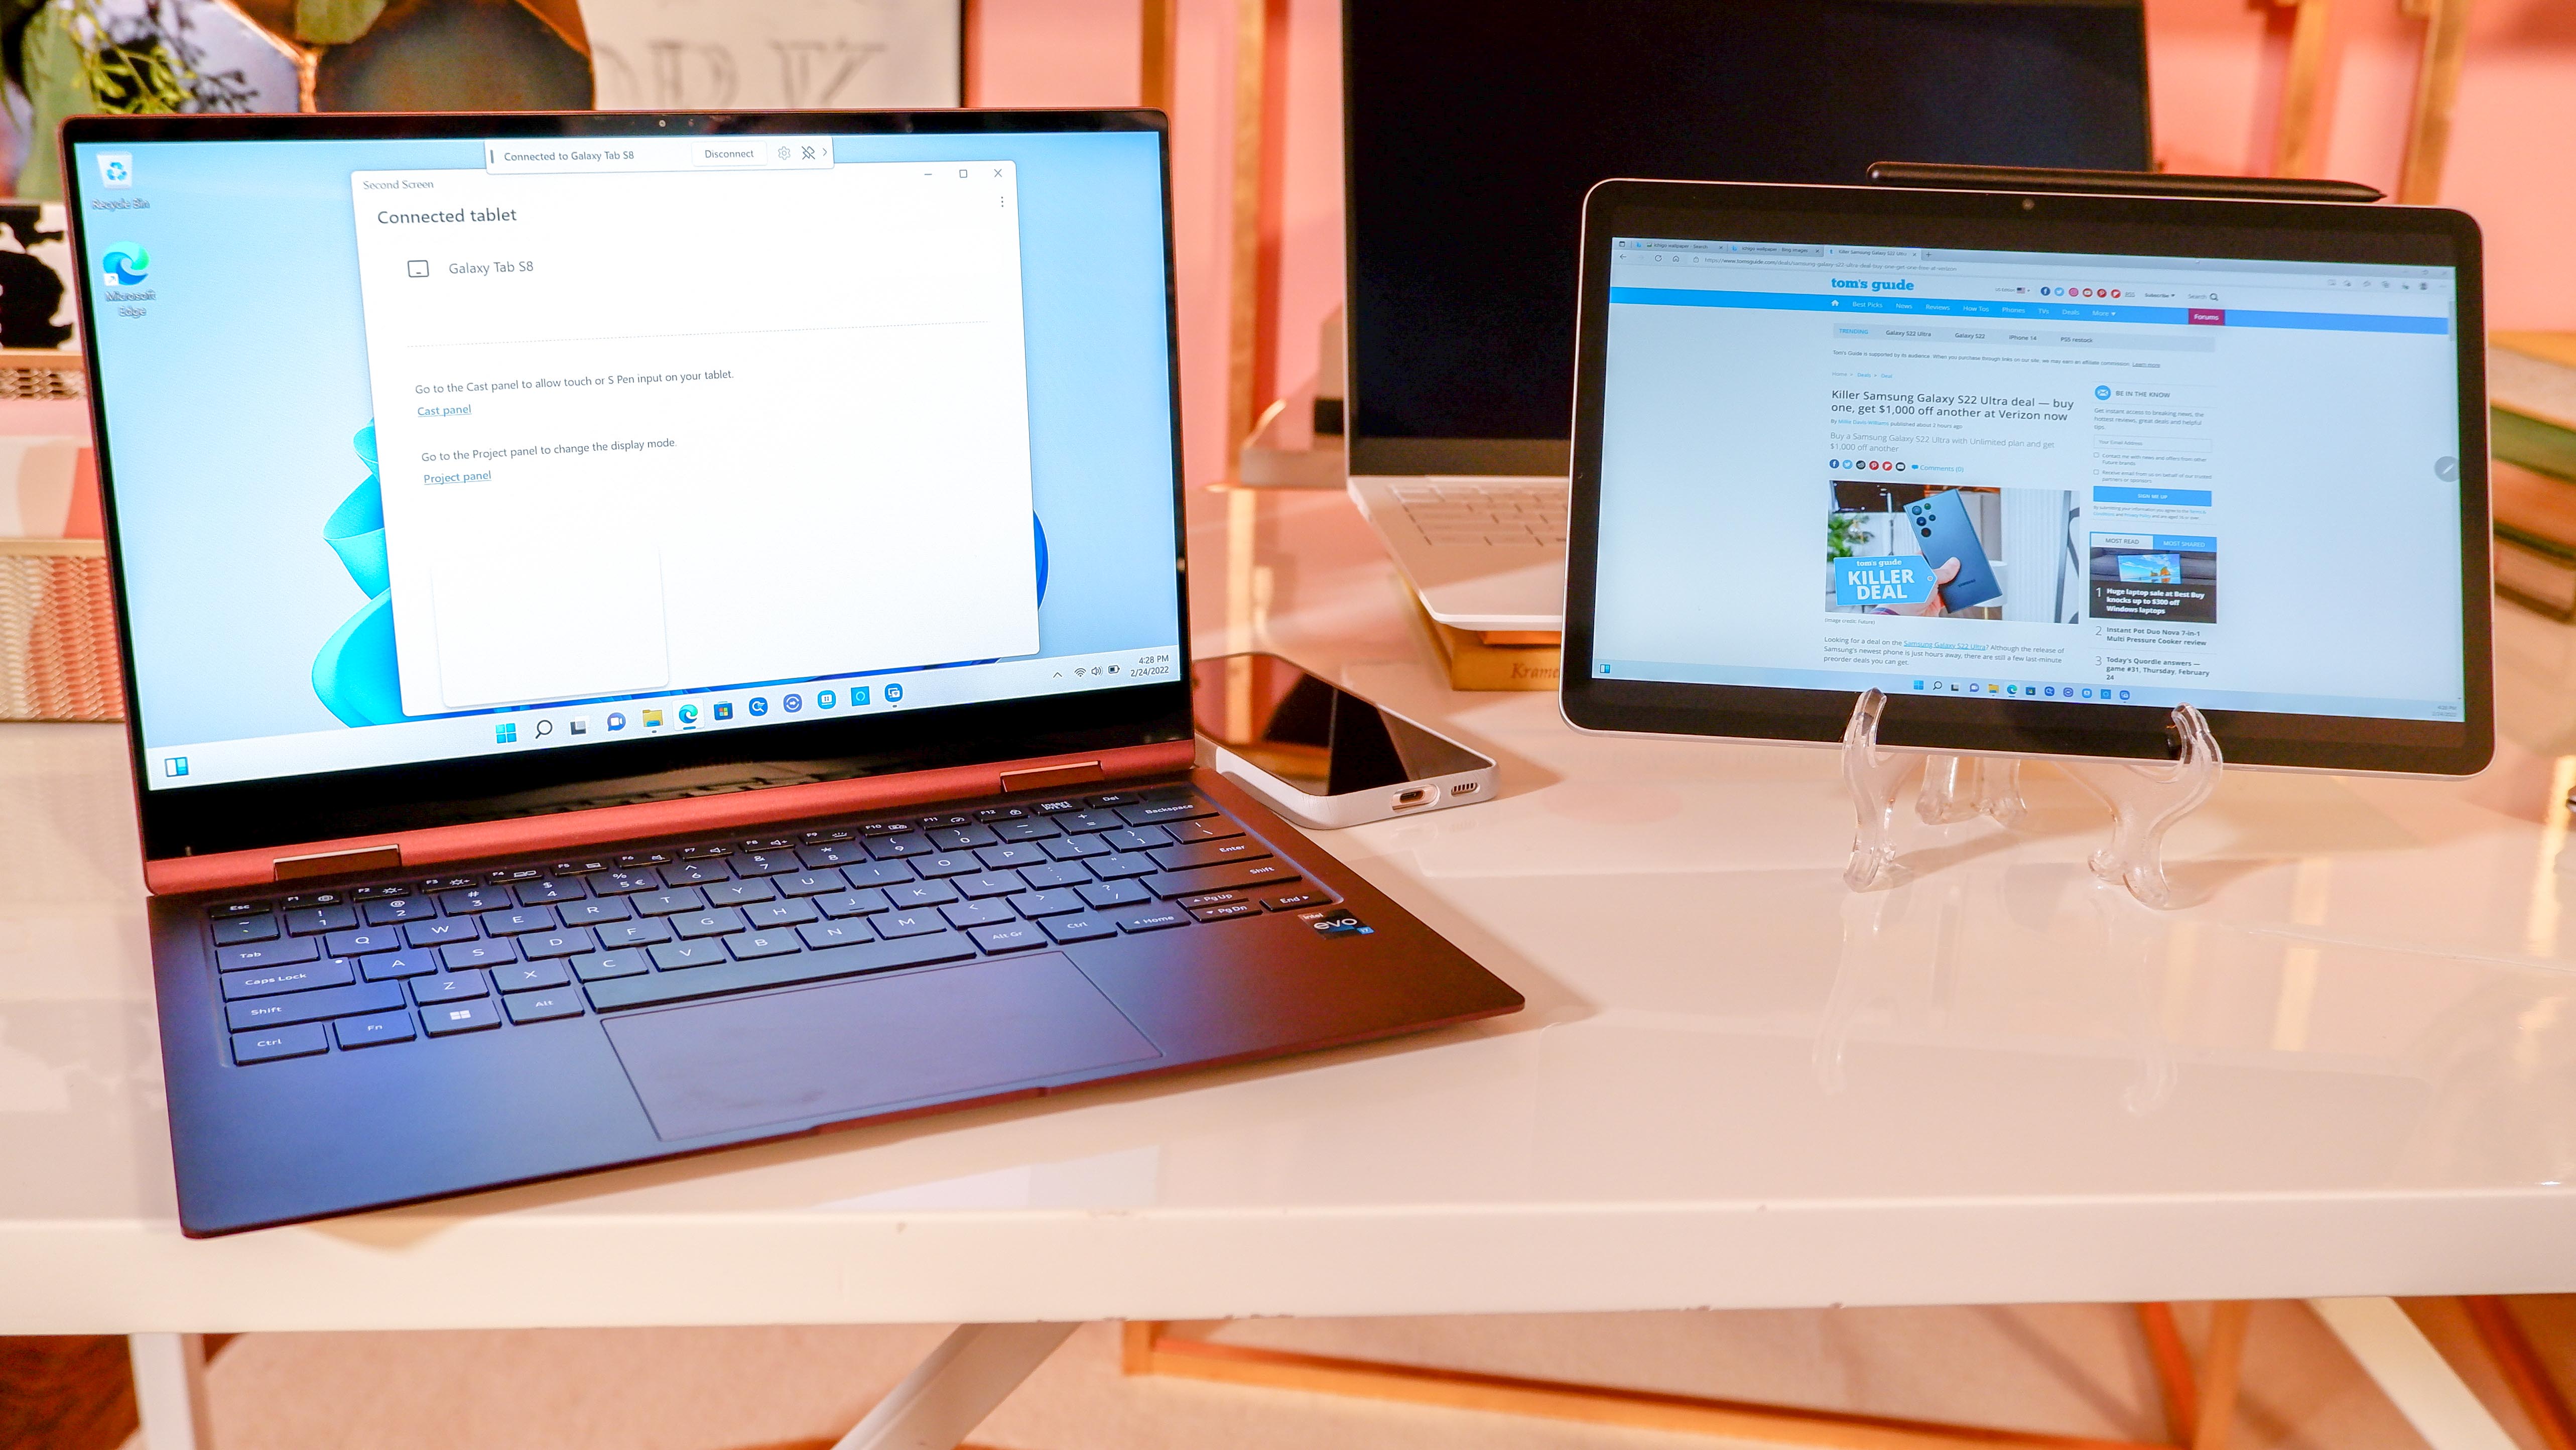 Samsung Galaxy Book2 Pro 360 open on table next to Samsung tablet